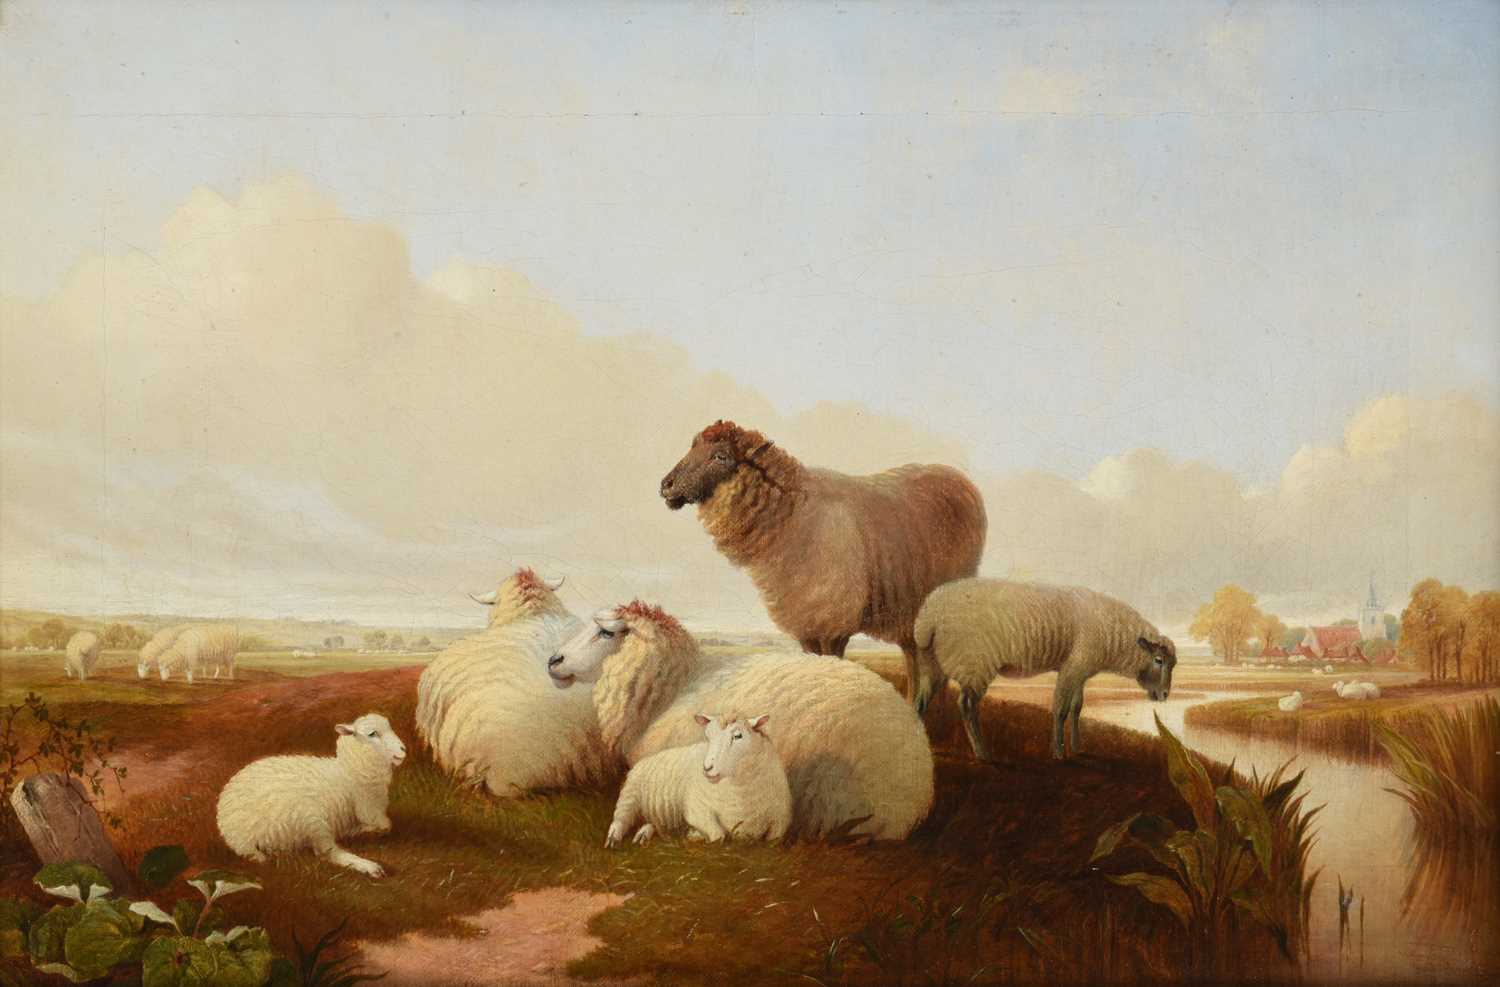 Follower of Thomas Sidney Cooper RA (1803-1902) Sheep beside a river in a Summer landscape Oil on